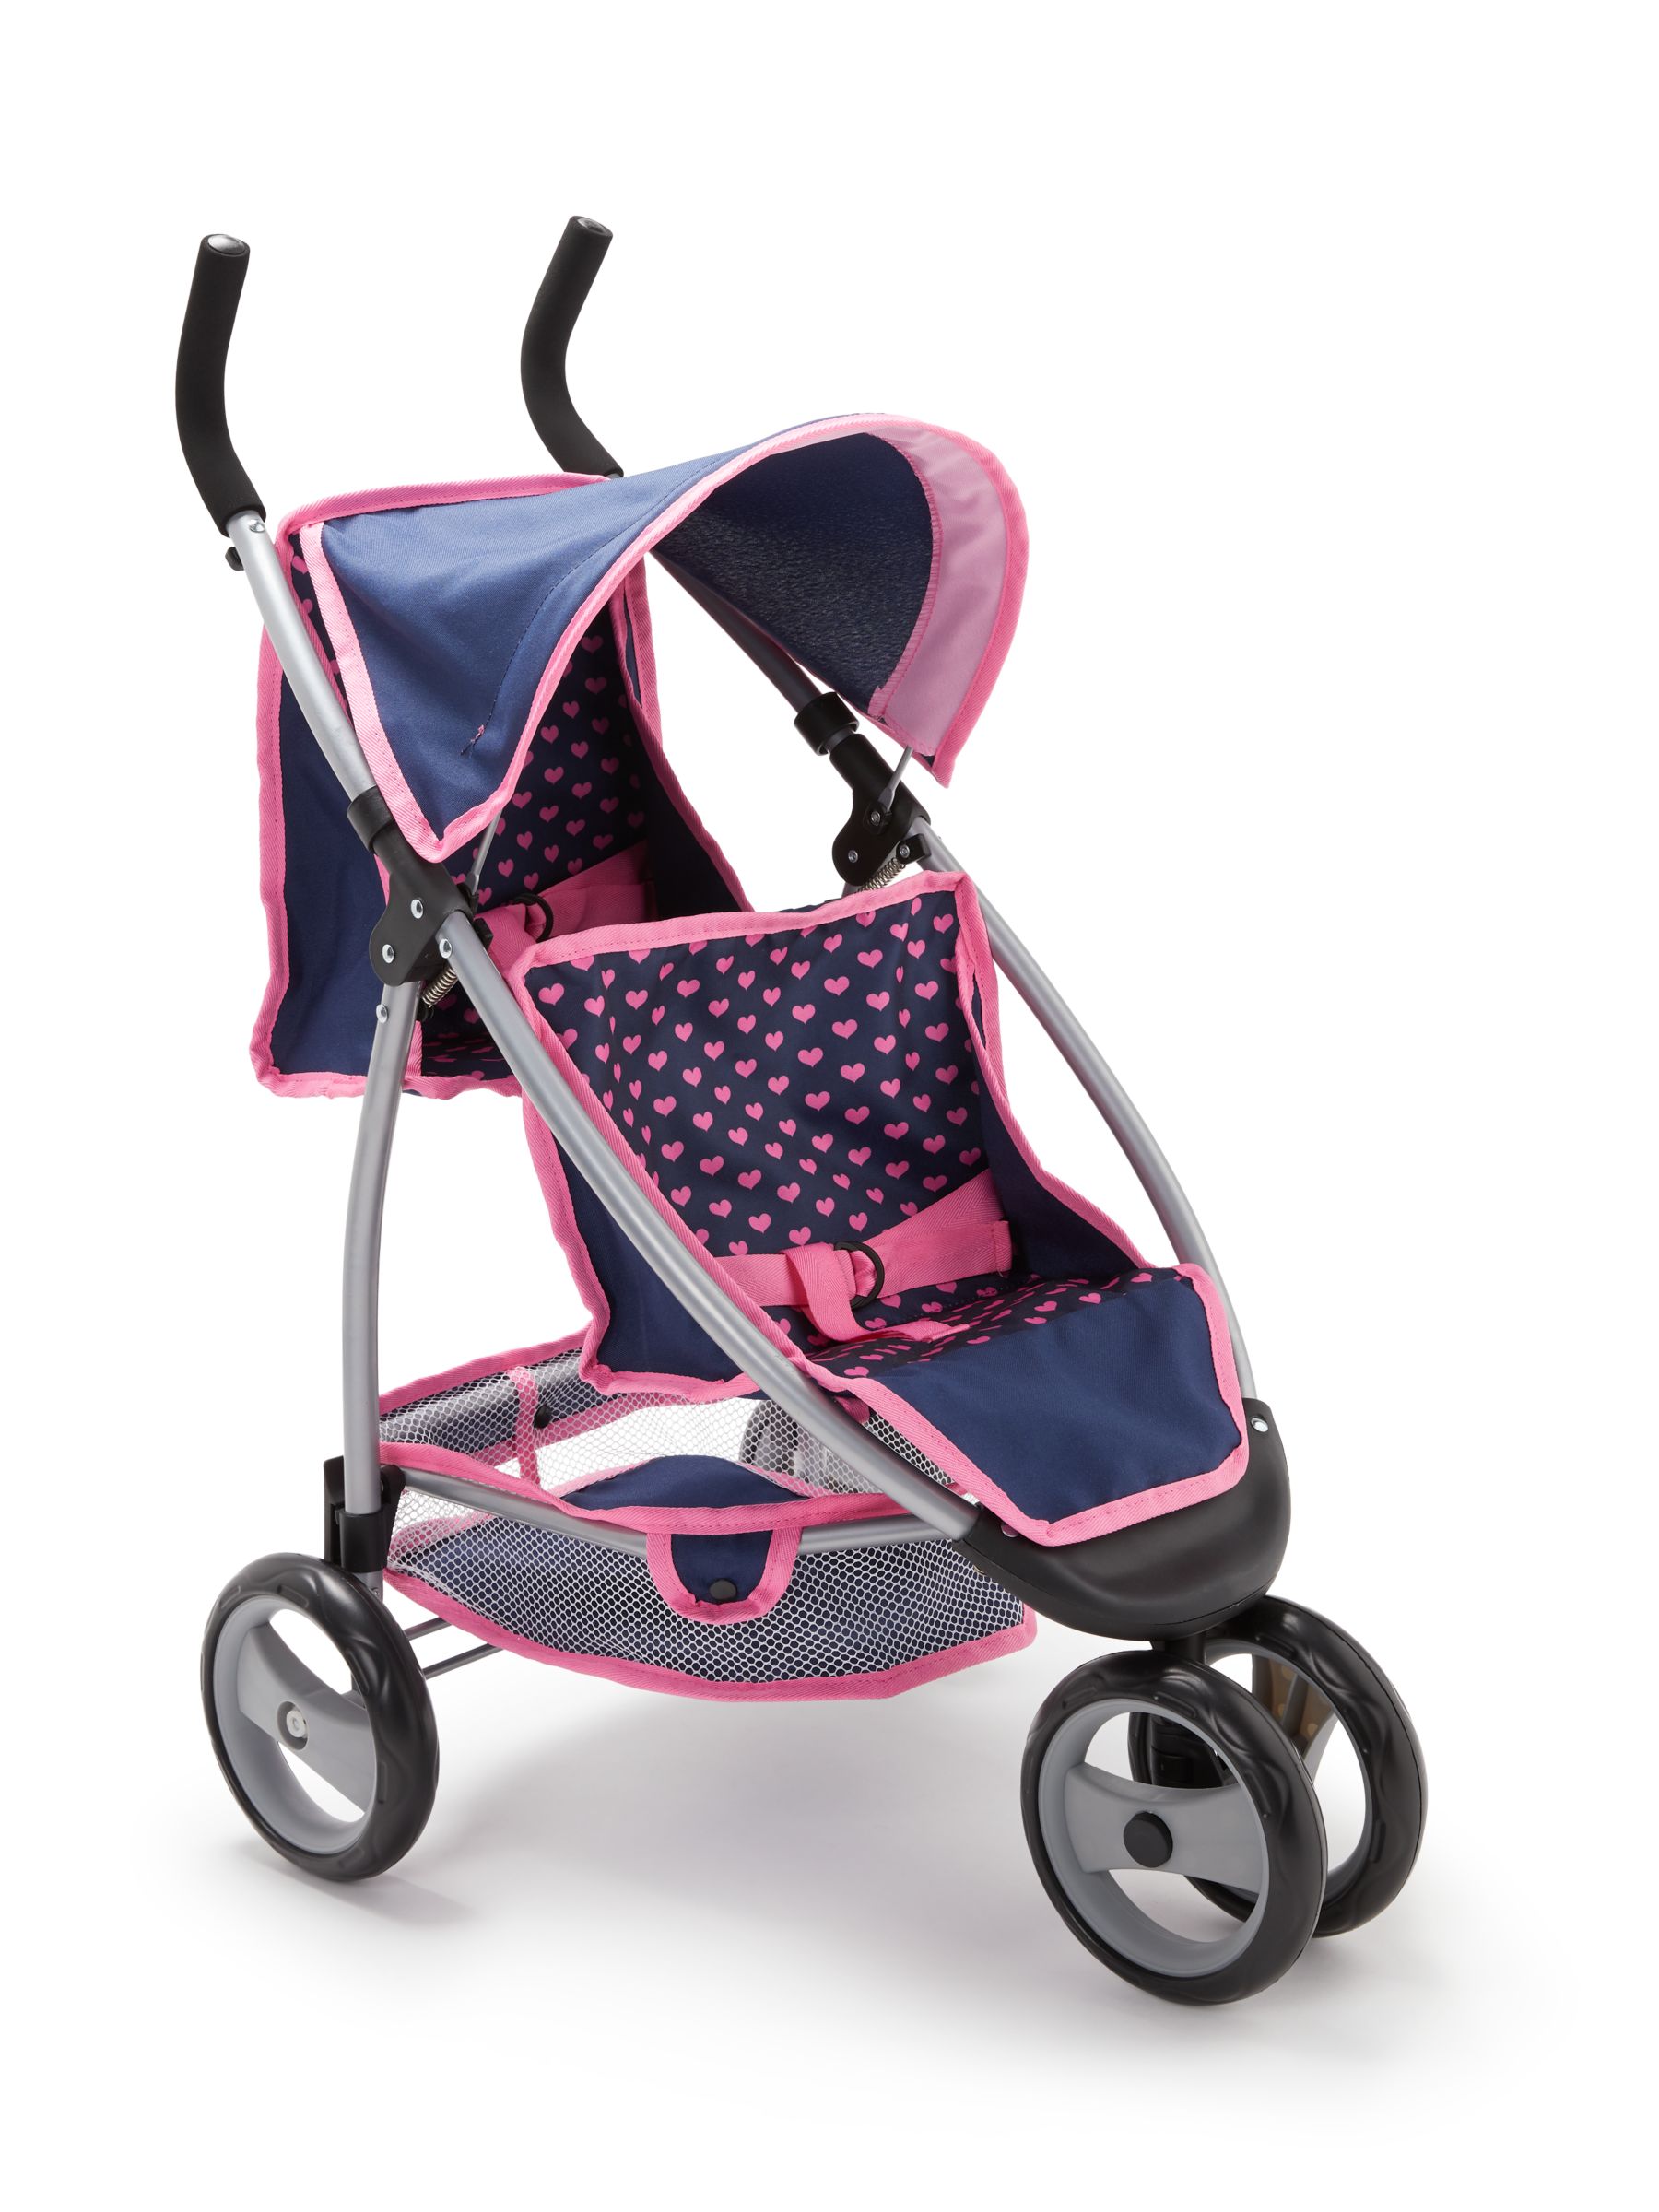 toy double pushchair